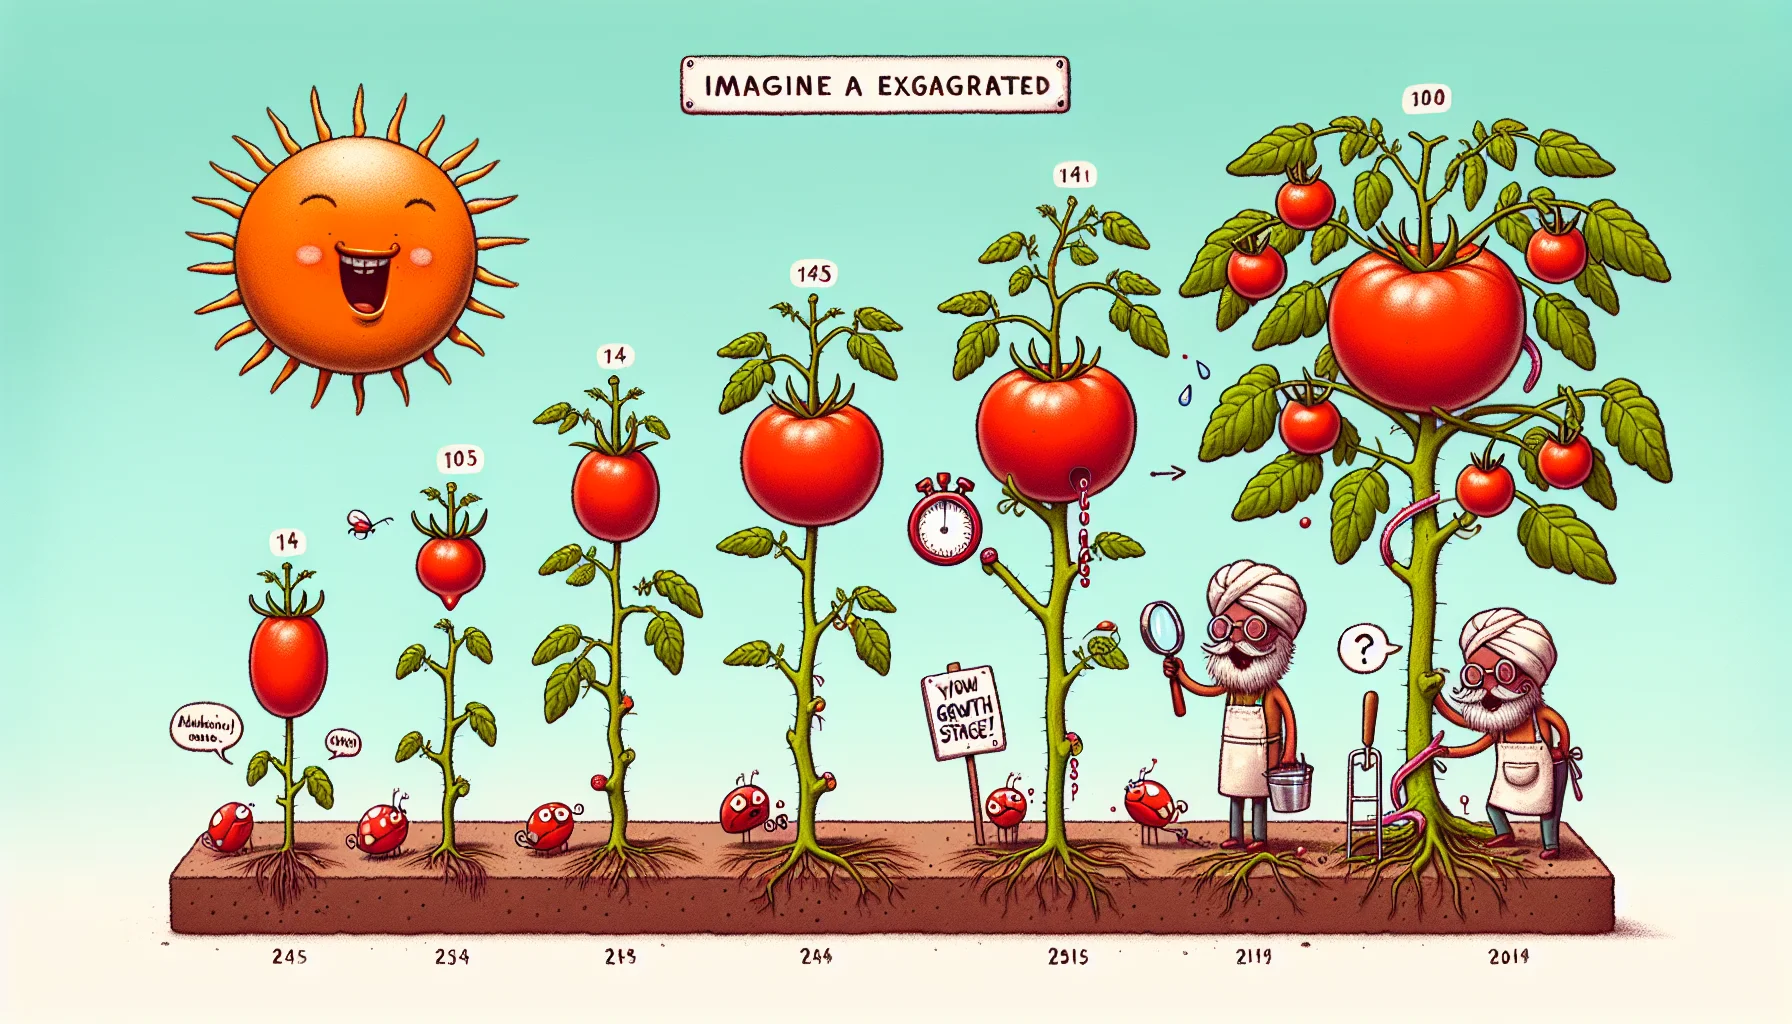 Imagine a humorously exaggerated timeline of a tomato plant's growth. At one stage, the tiny tomato seed germinates, sprouting tender green shoots. As time progresses, the plant matures, bearing lush, leafy branches. Finally, bright red tomatoes emerge, beautifully plump and ripe. This scene is conveyed using quirky elements like a cheery sun with a stopwatch, a diligently working gardener of South Asian descent with a magnifying glass tracking each growth stage, and a supportive crowd of garden bugs cheering on. The quirky and light-hearted atmosphere is intended to foster an appreciation for gardening.